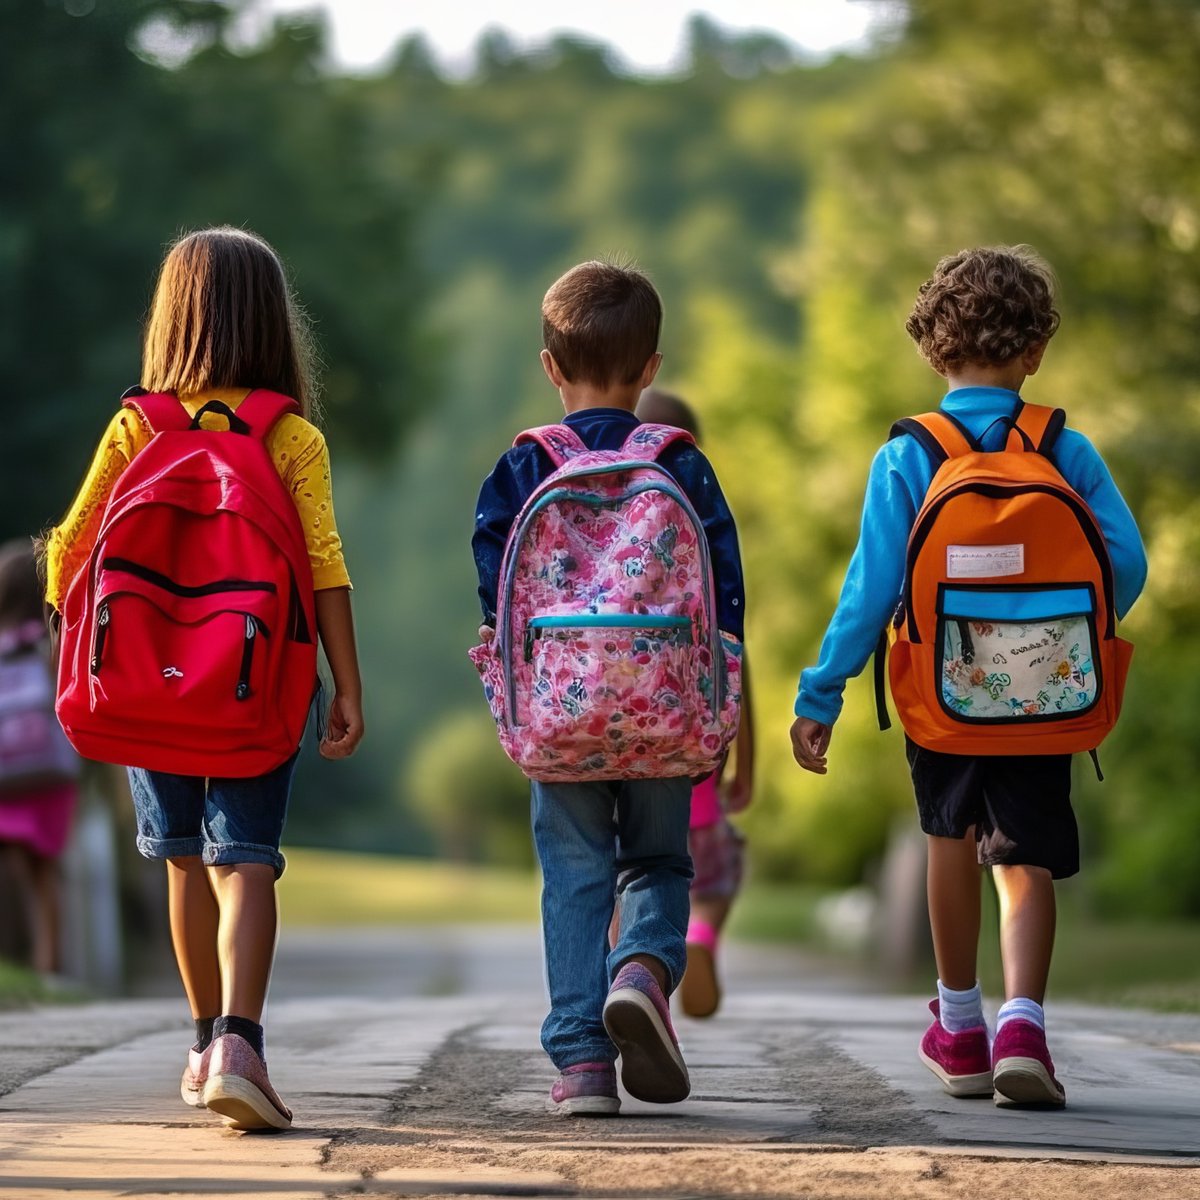 🚶We’re looking forward to Primary School students in our region taking part in National Walk Safely to School Day, tomorrow. 🚸Now in its 25th year, National Walk Safely to School Day is an event on May 10 when children are encouraged to walk and commute safely to school.